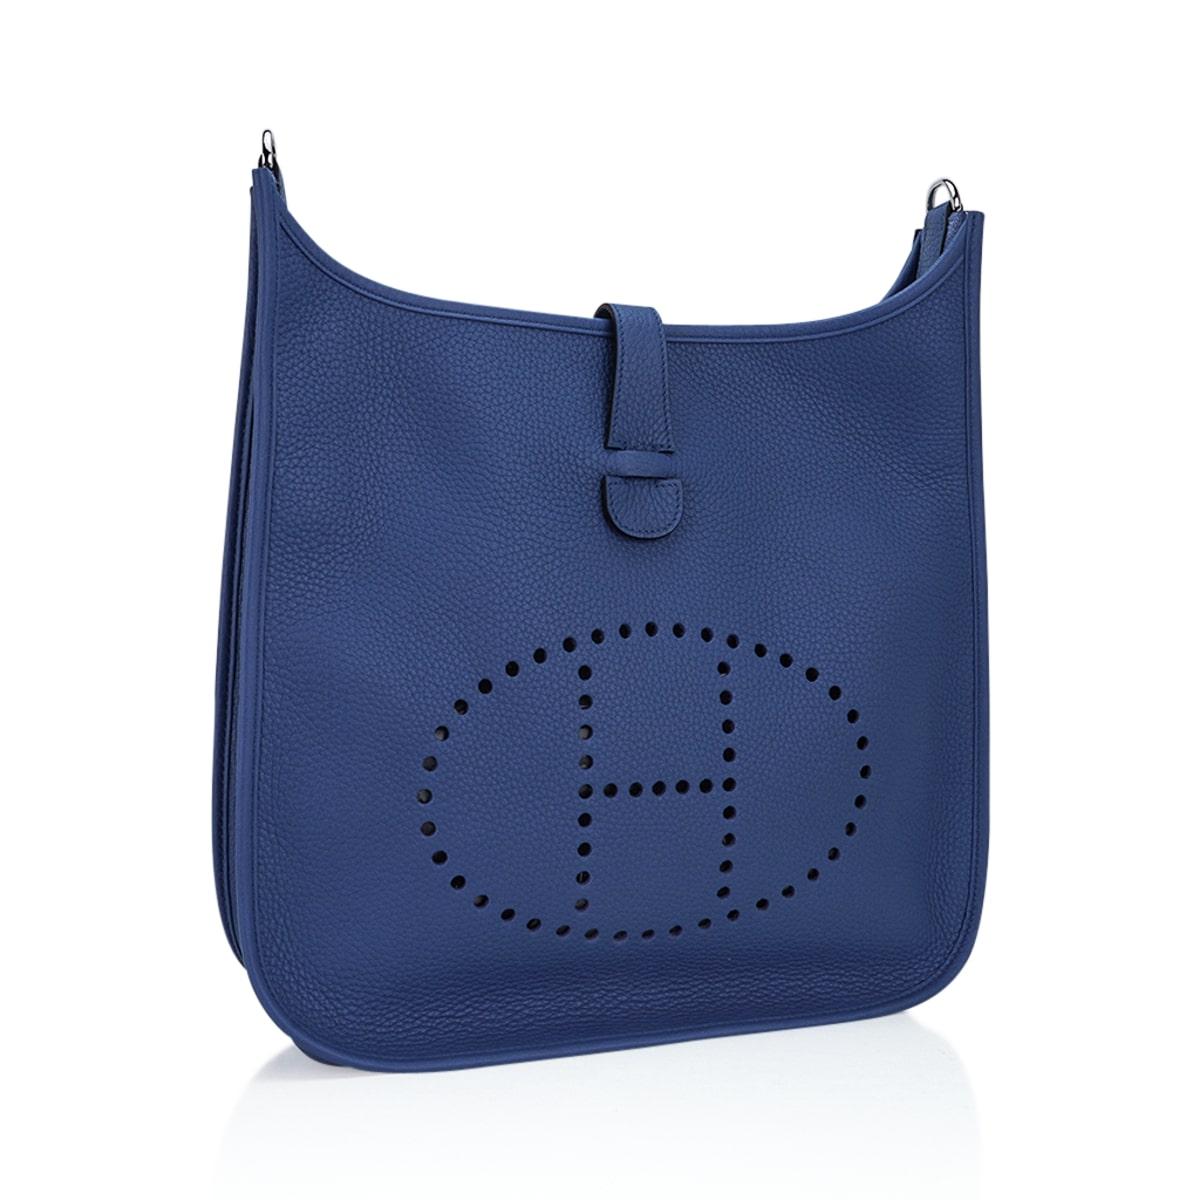 Mightychic offers an Hermes Evelyne GM featured in Blue Agate.
This beautiful blue is a perfect neutral for year round wear.
Fresh with Palladium hardware.
Fabulous shoulder or cross body bag with roomy interior and rear outside deep pocket.
Plush